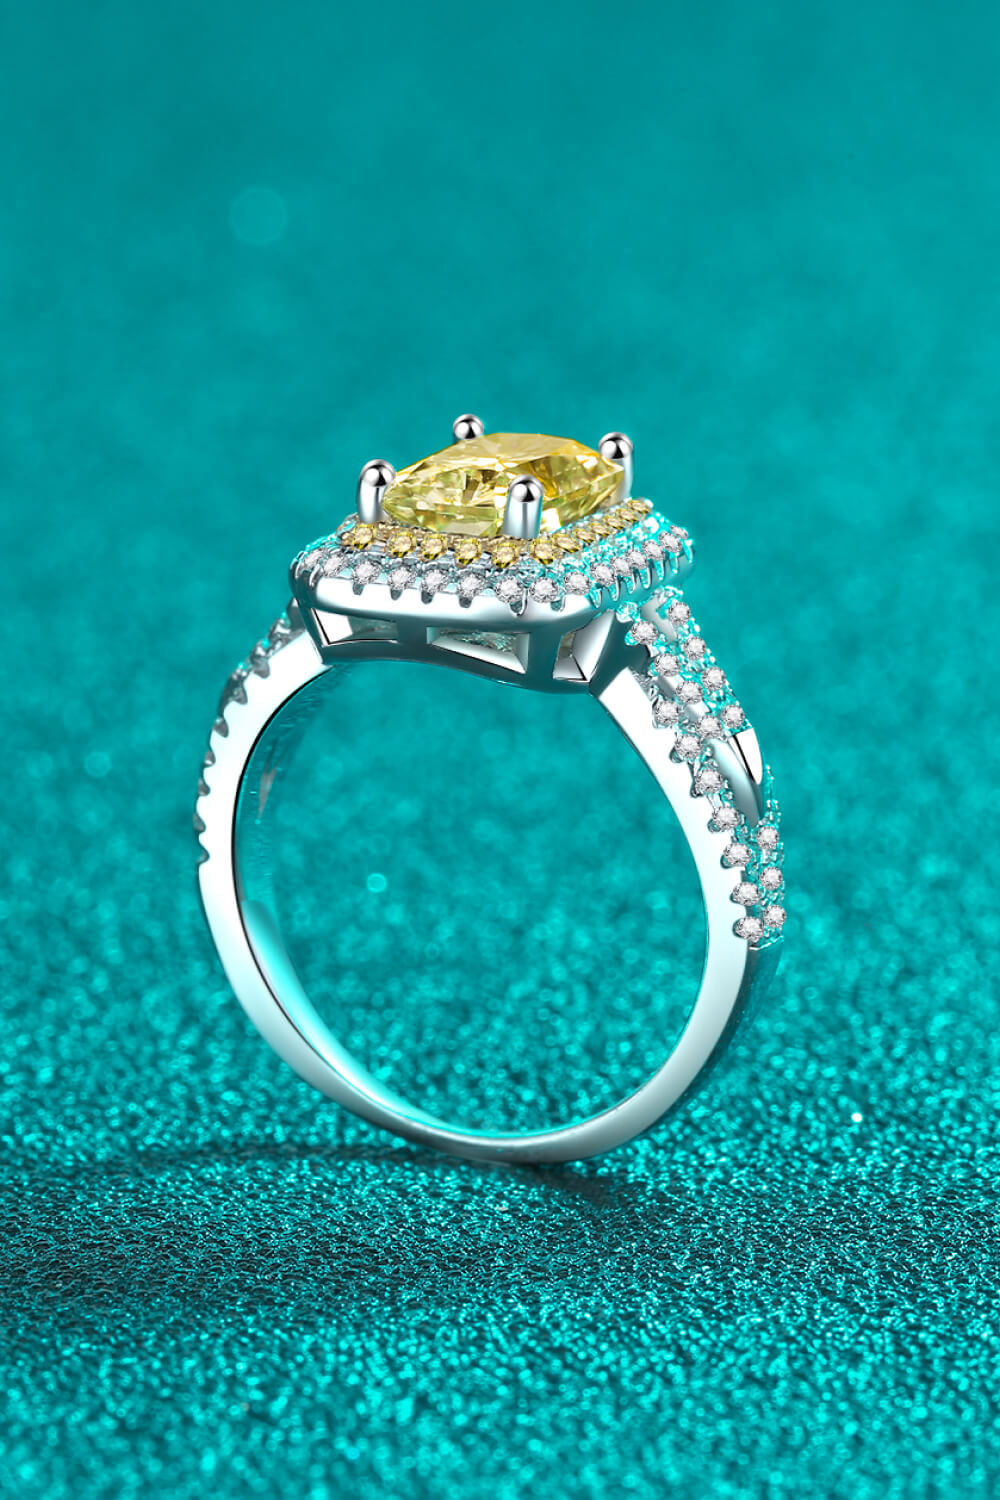 "Can't Stop Your Shine" 2 Carat Moissanite Ring